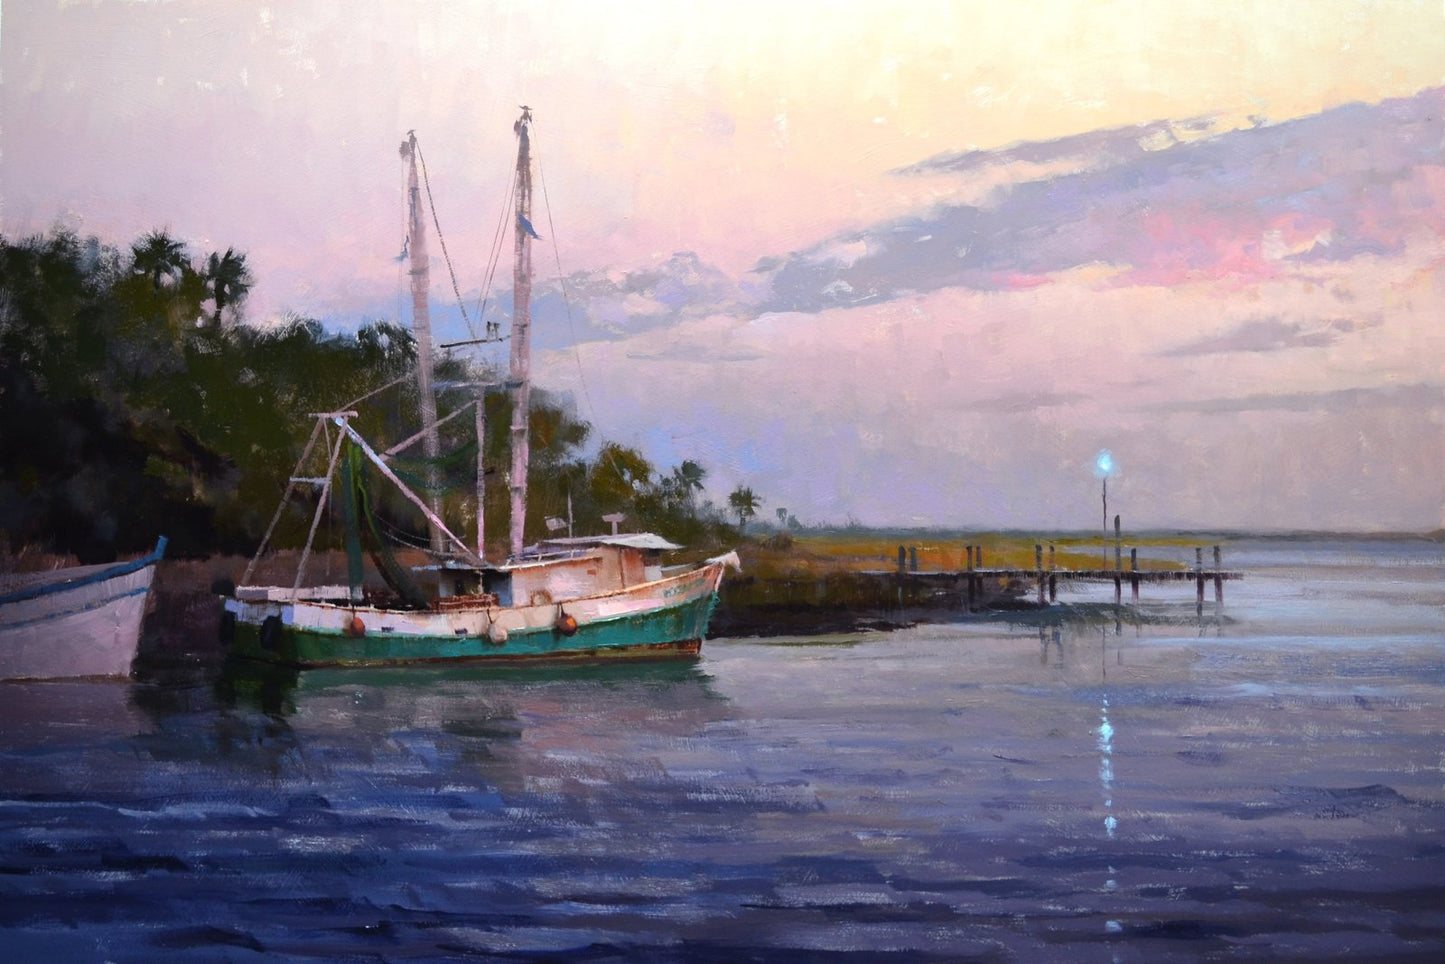 Shem Creek Evening by Marc Anderson at LePrince Galleries